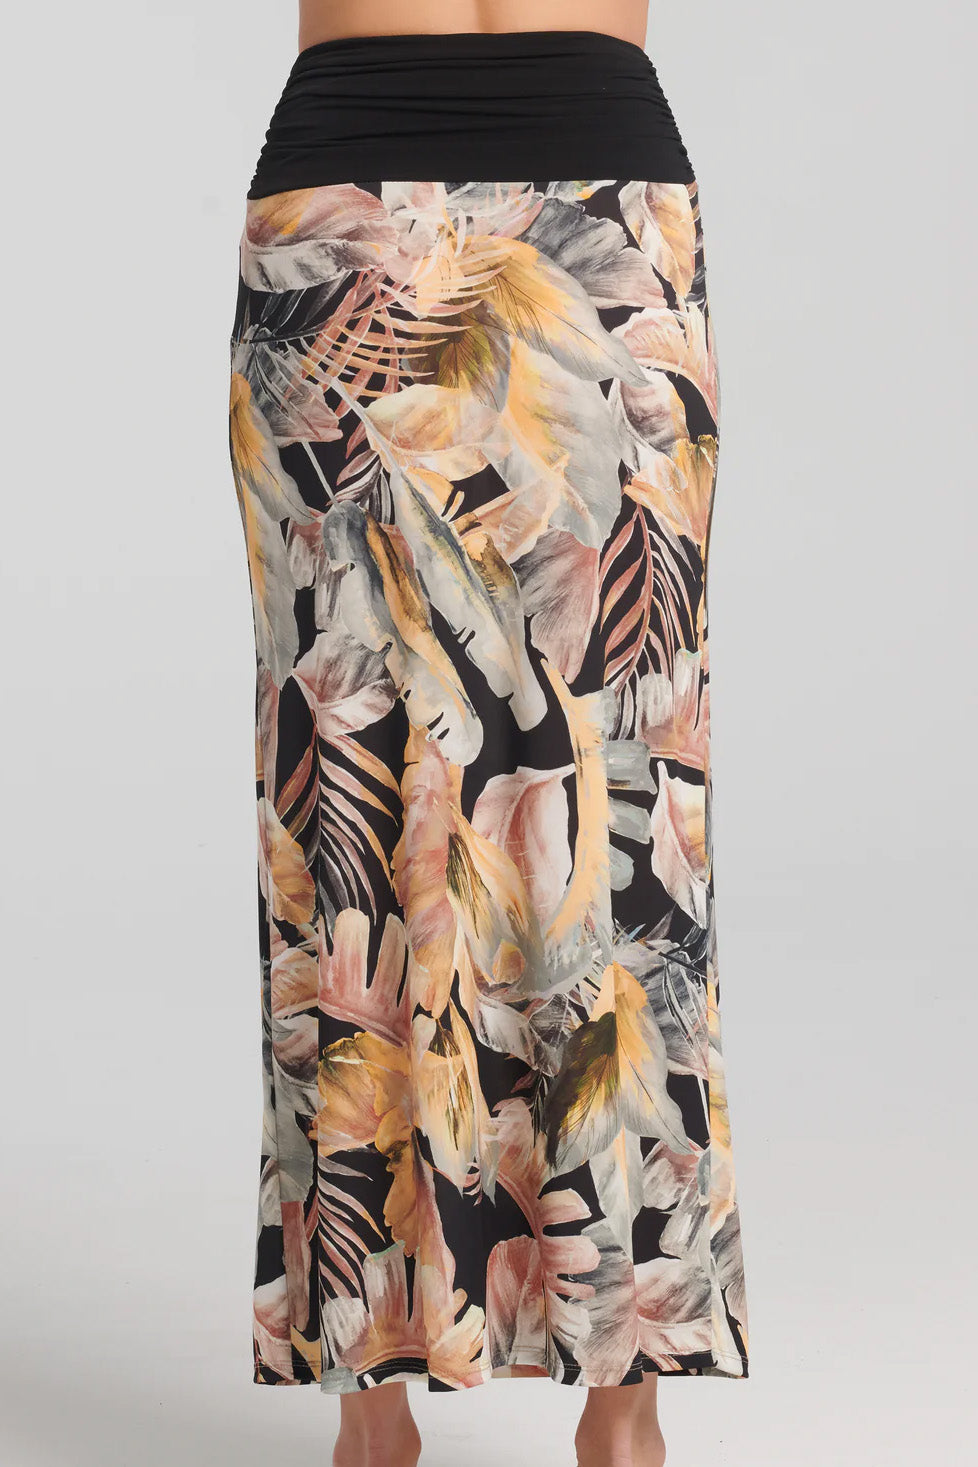 Divona Skirt by Kollontai, back view, wide black band at top, neutral toned tropical print below, wear as a strapless midi dress or a maxi skirt, sizes XS to XXL, made in Quebec